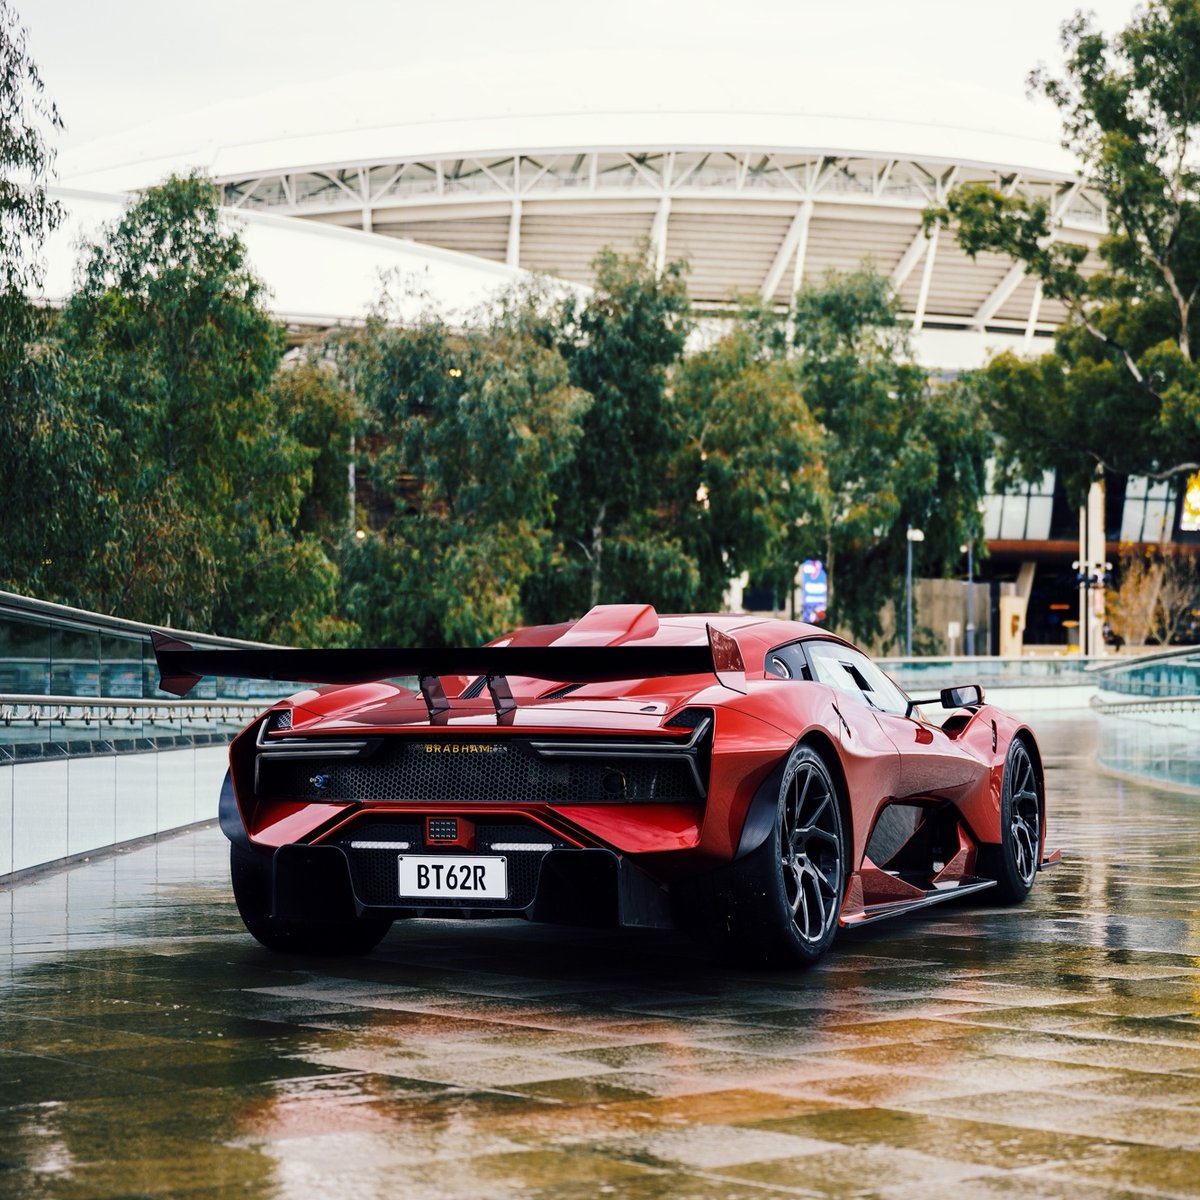 Brabham have just announced their BT62, a road legal race car straight from the factor! Not to be confused with the regular BT62 which a customer had converted to road legal for a small sum of £150,00 😆😜| 📸 @brabhamauto #brabhamauto #brabham #brabhambt62 #bt62 #bt62r